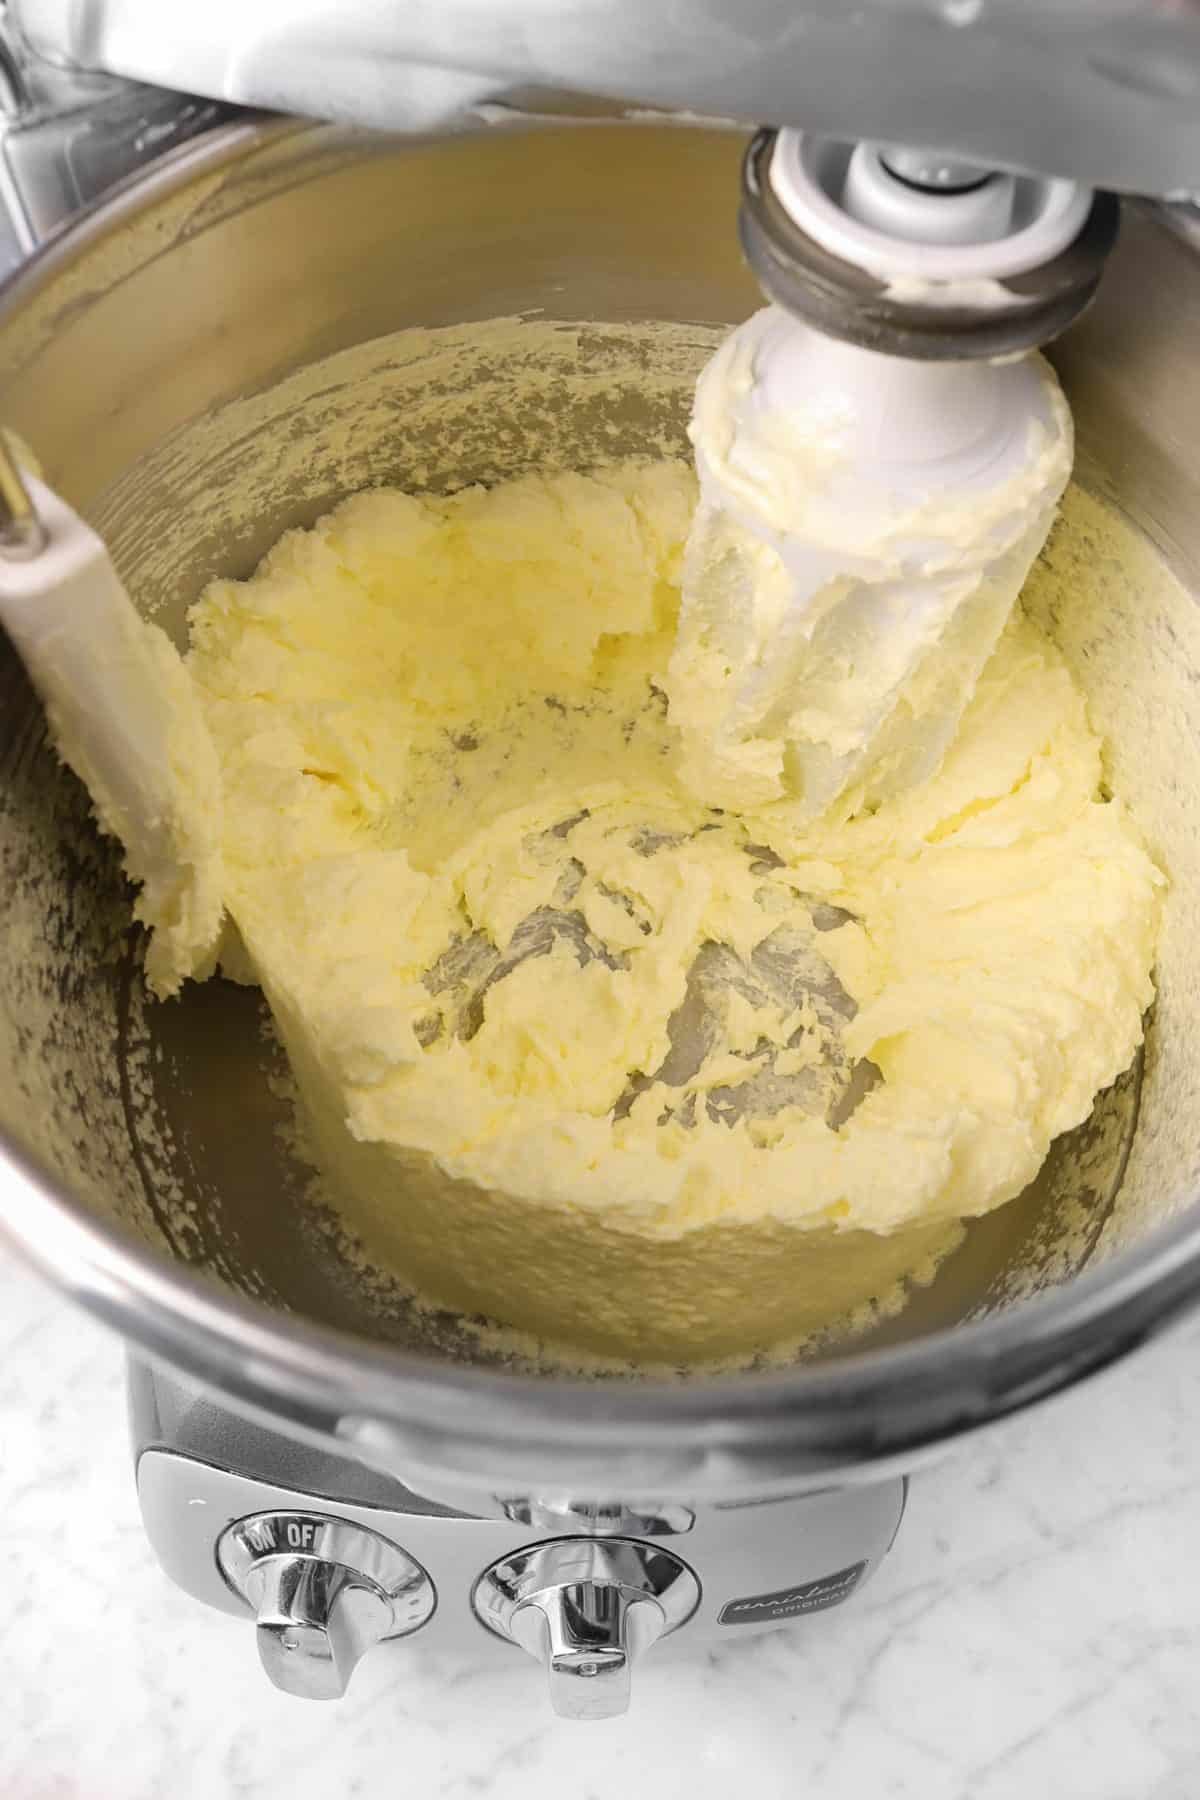 egg, sugar, and butter mixture in a mixer